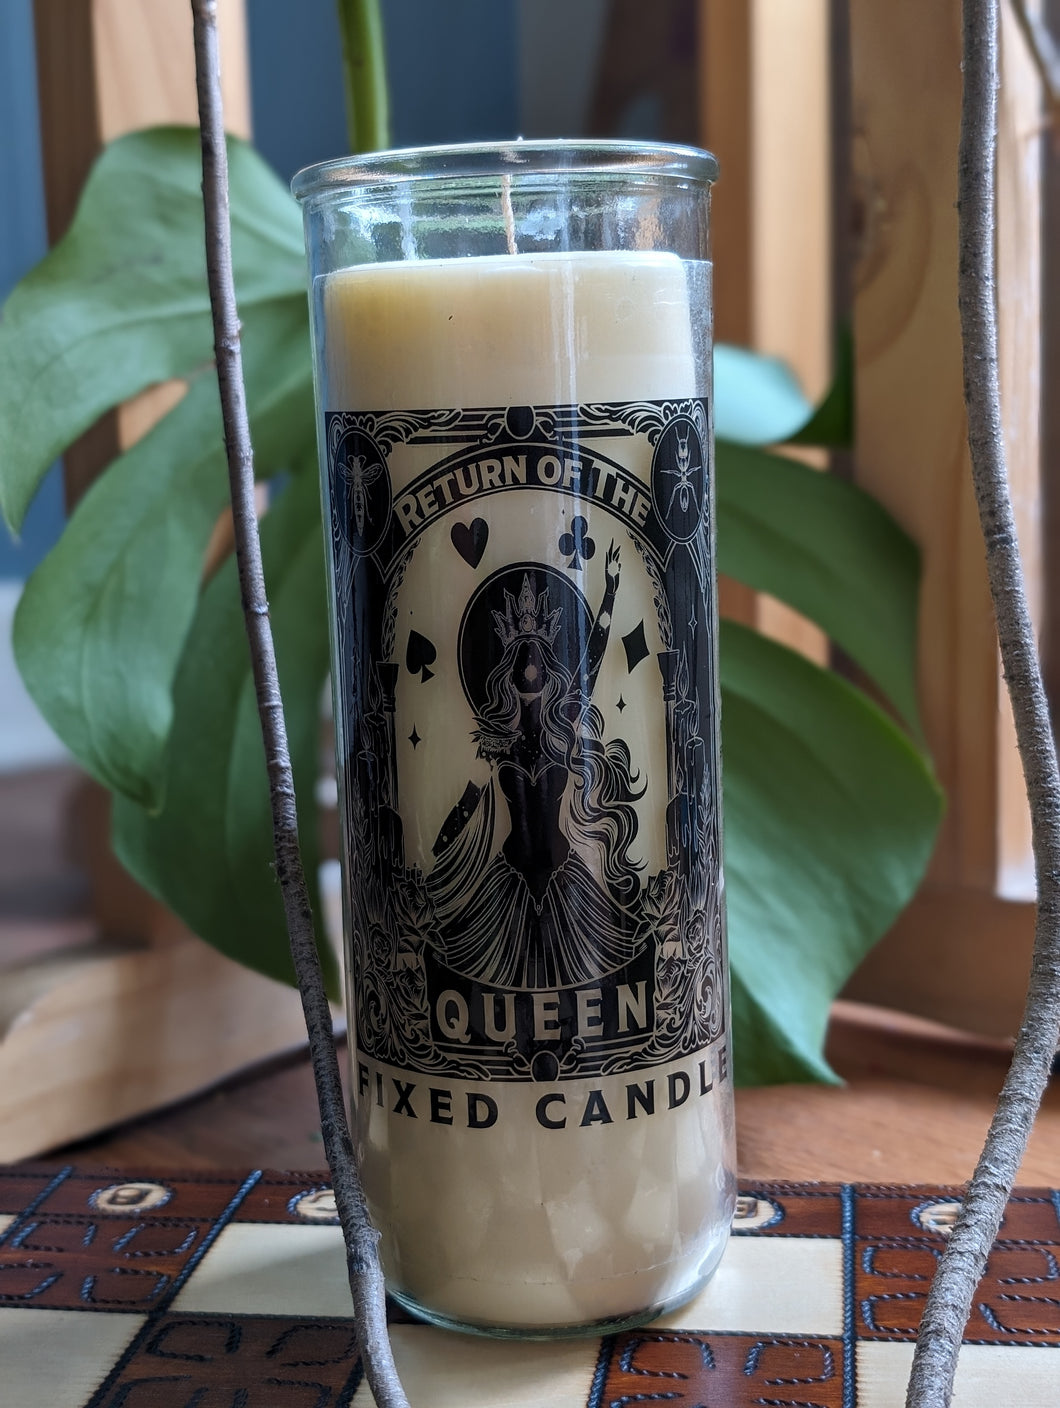 Return of the Queen Hand Poured Fixed Candle